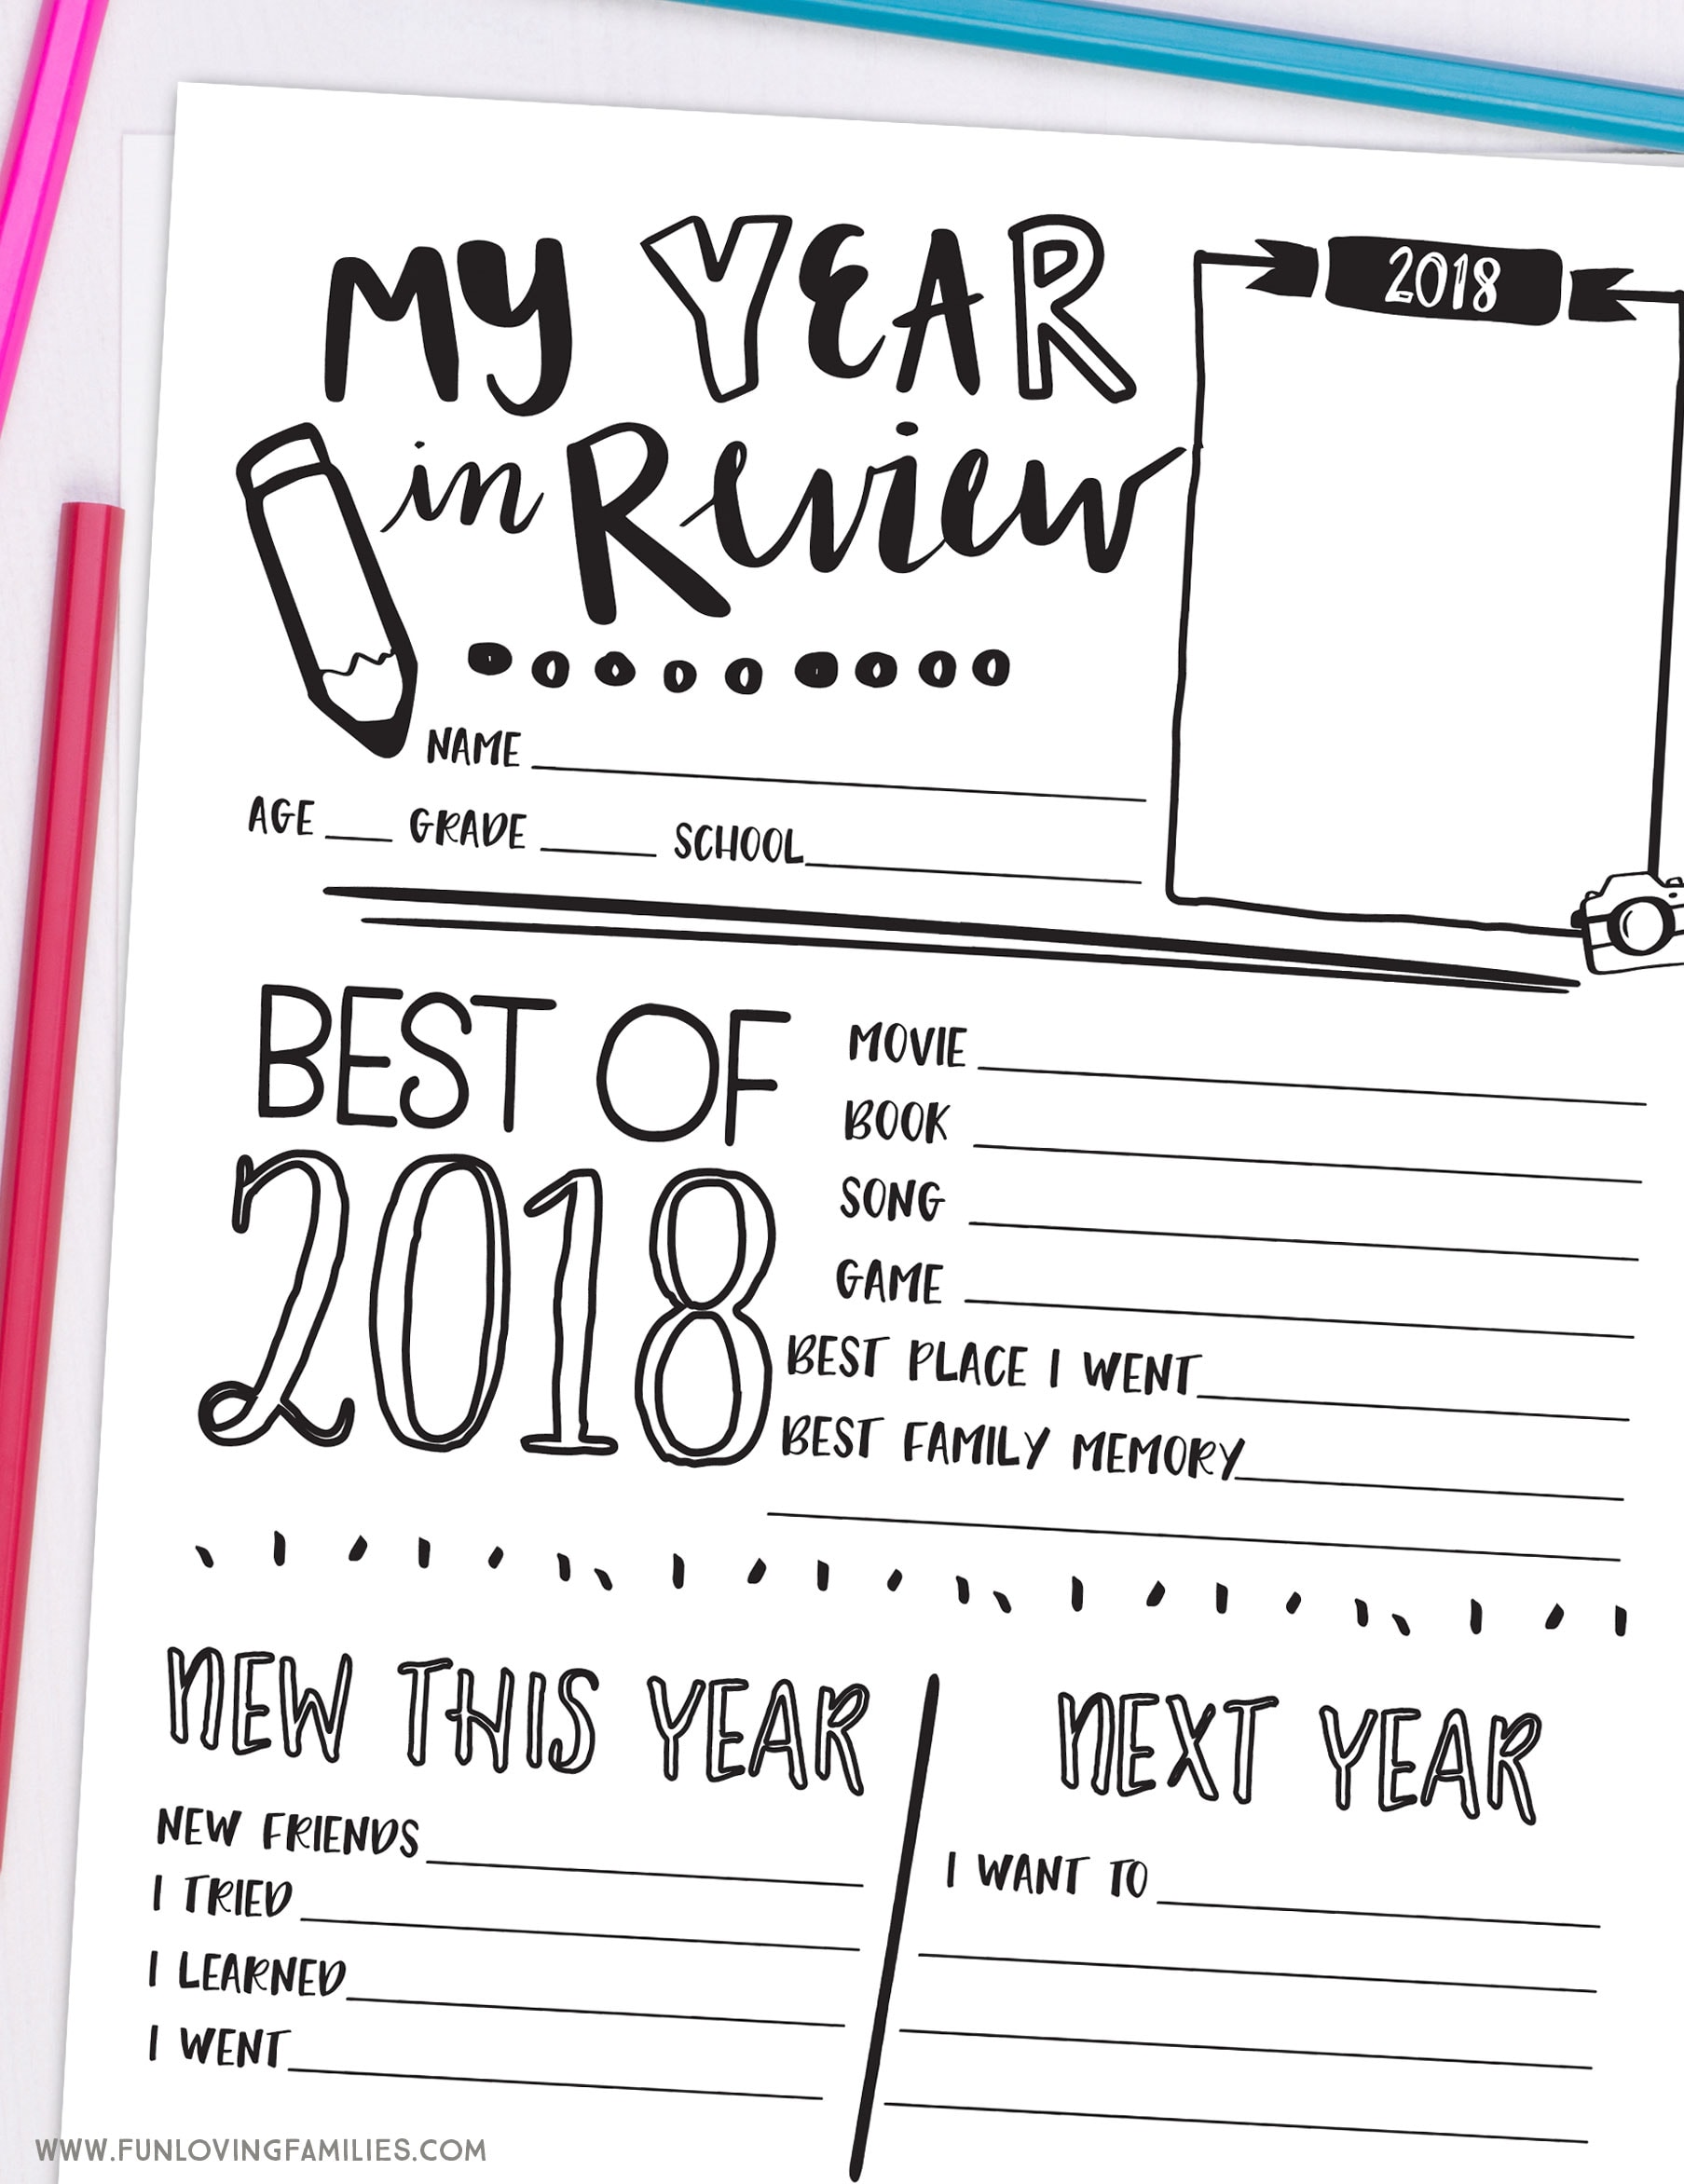 2018 Year in Review Printable for Kids Fun Loving Families